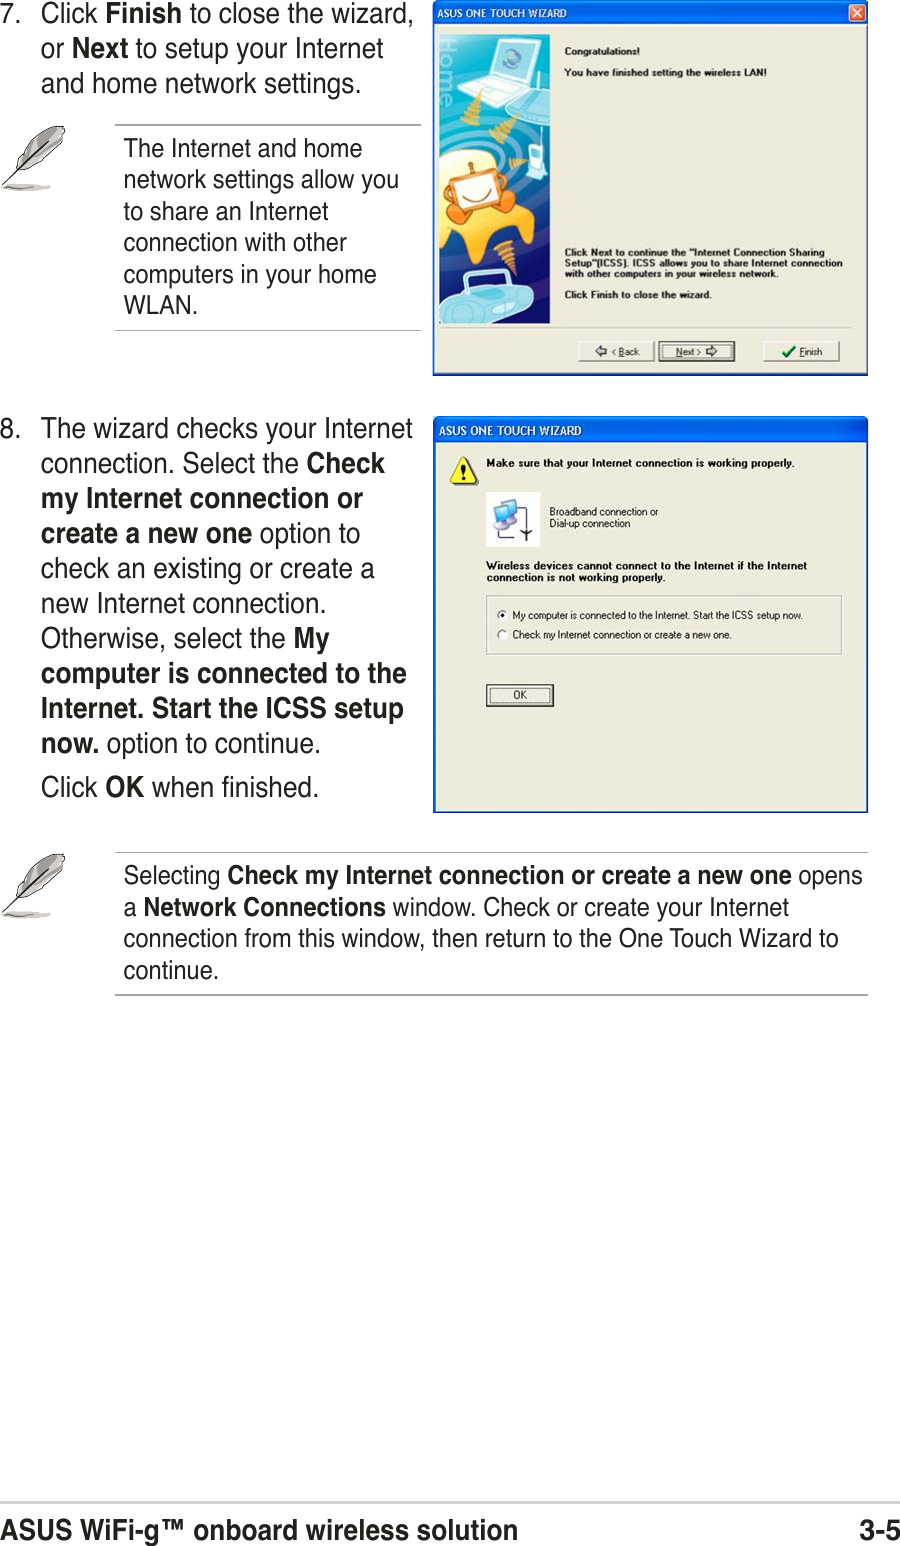 ASUS WiFi-g™ onboard wireless solution3-57. Click Finish to close the wizard,or Next to setup your Internetand home network settings.The Internet and homenetwork settings allow youto share an Internetconnection with othercomputers in your homeWLAN.8. The wizard checks your Internetconnection. Select the Checkmy Internet connection orcreate a new one option tocheck an existing or create anew Internet connection.Otherwise, select the Mycomputer is connected to theInternet. Start the ICSS setupnow. option to continue.Click OK when finished.Selecting Check my Internet connection or create a new one opensa Network Connections window. Check or create your Internetconnection from this window, then return to the One Touch Wizard tocontinue.